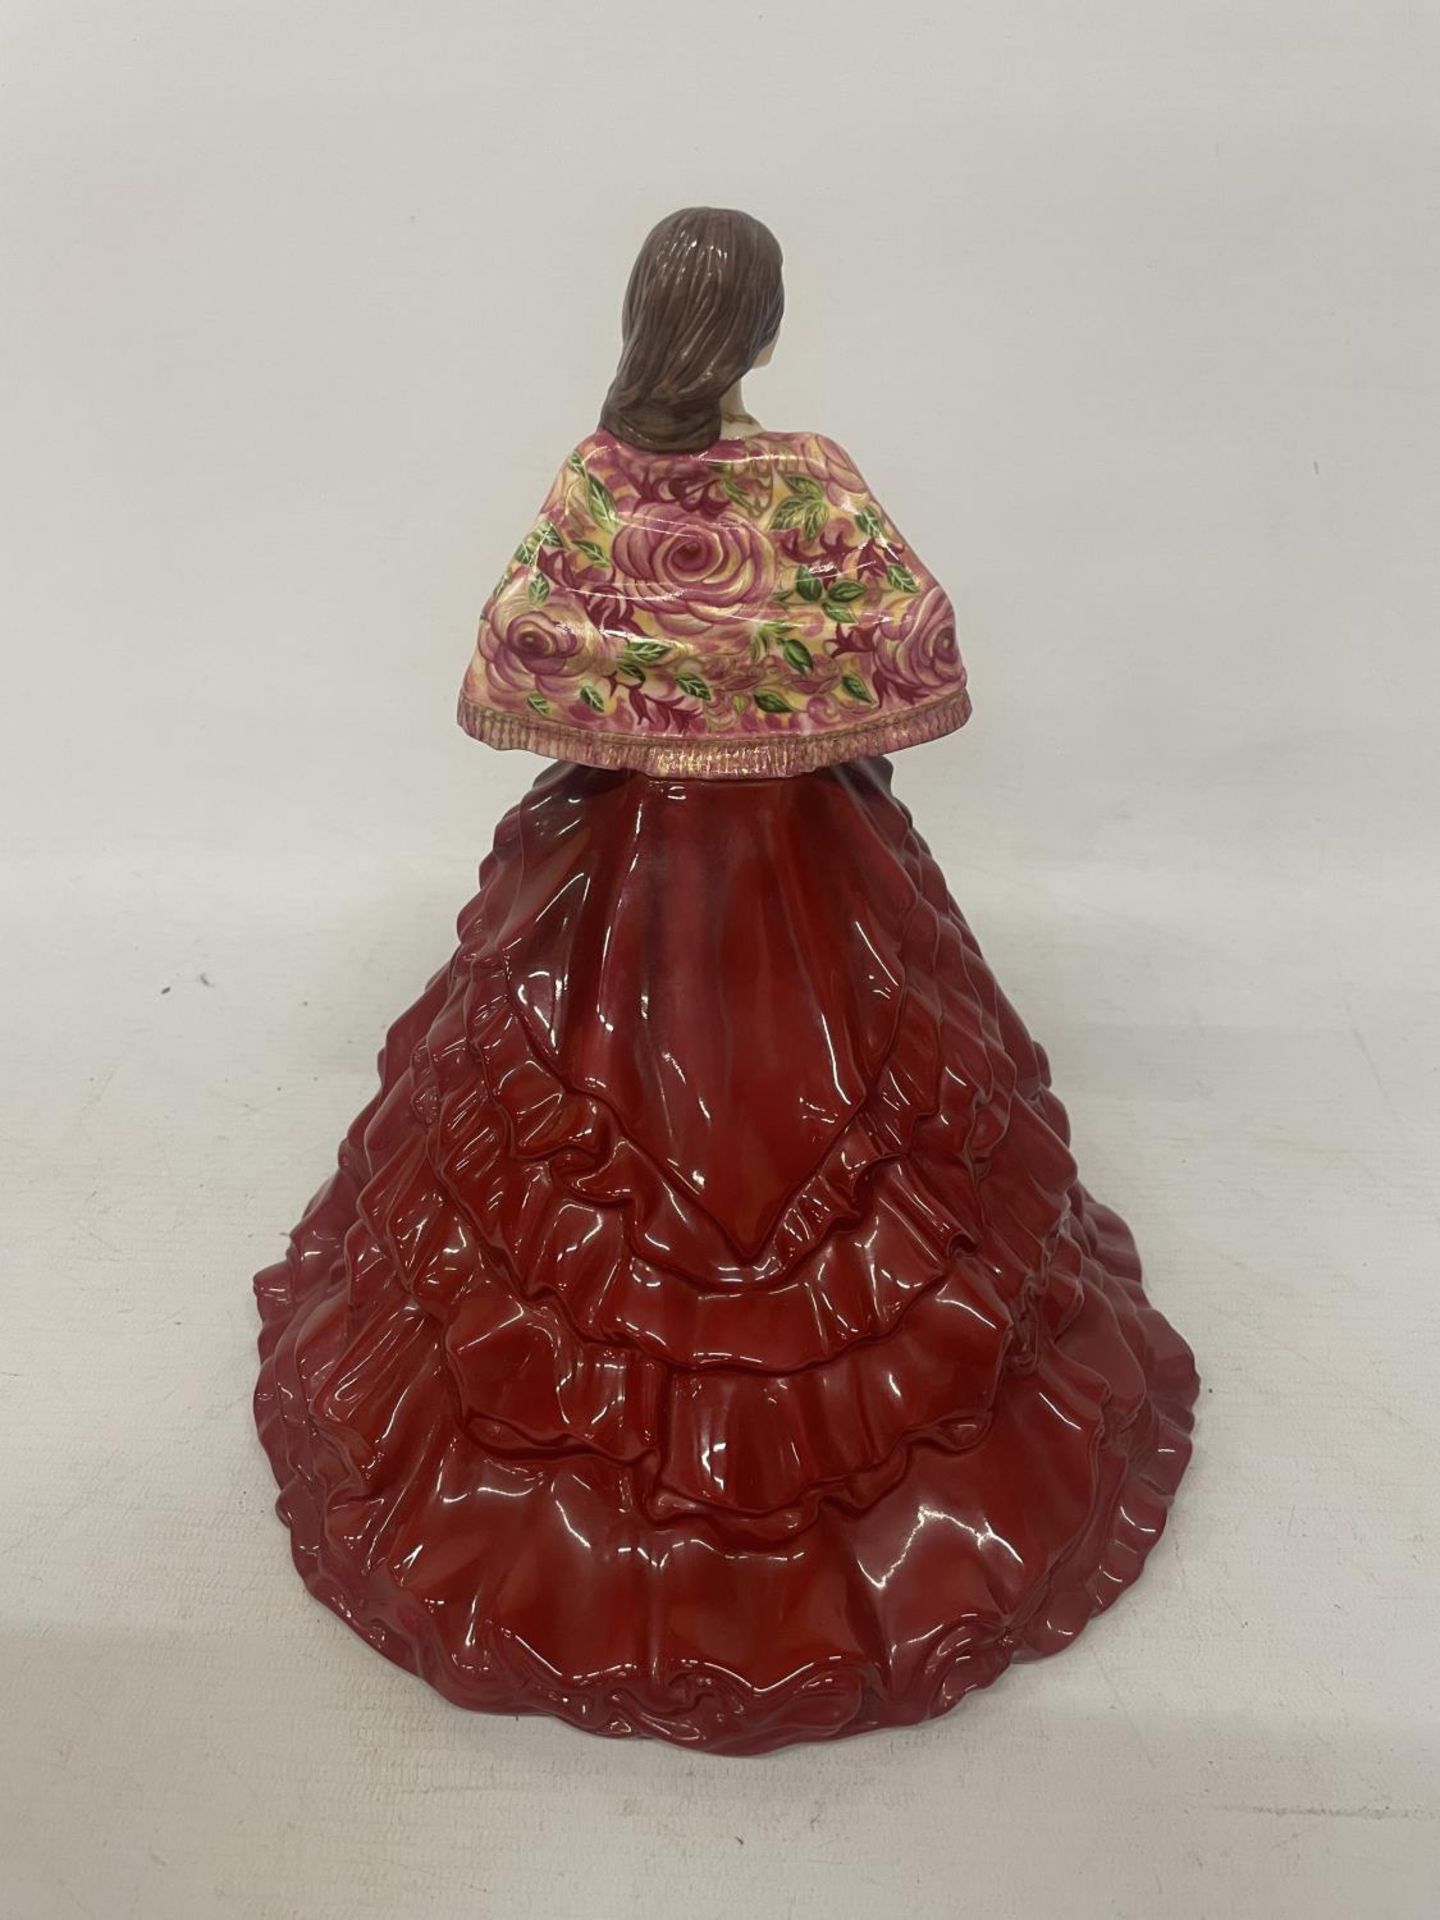 A LIMITED EDITION ROYAL DOULTON FIGURE ROSITA BY COMPTON AND WOODHOUSE 25CM HIGH 844/2950 - Image 3 of 4